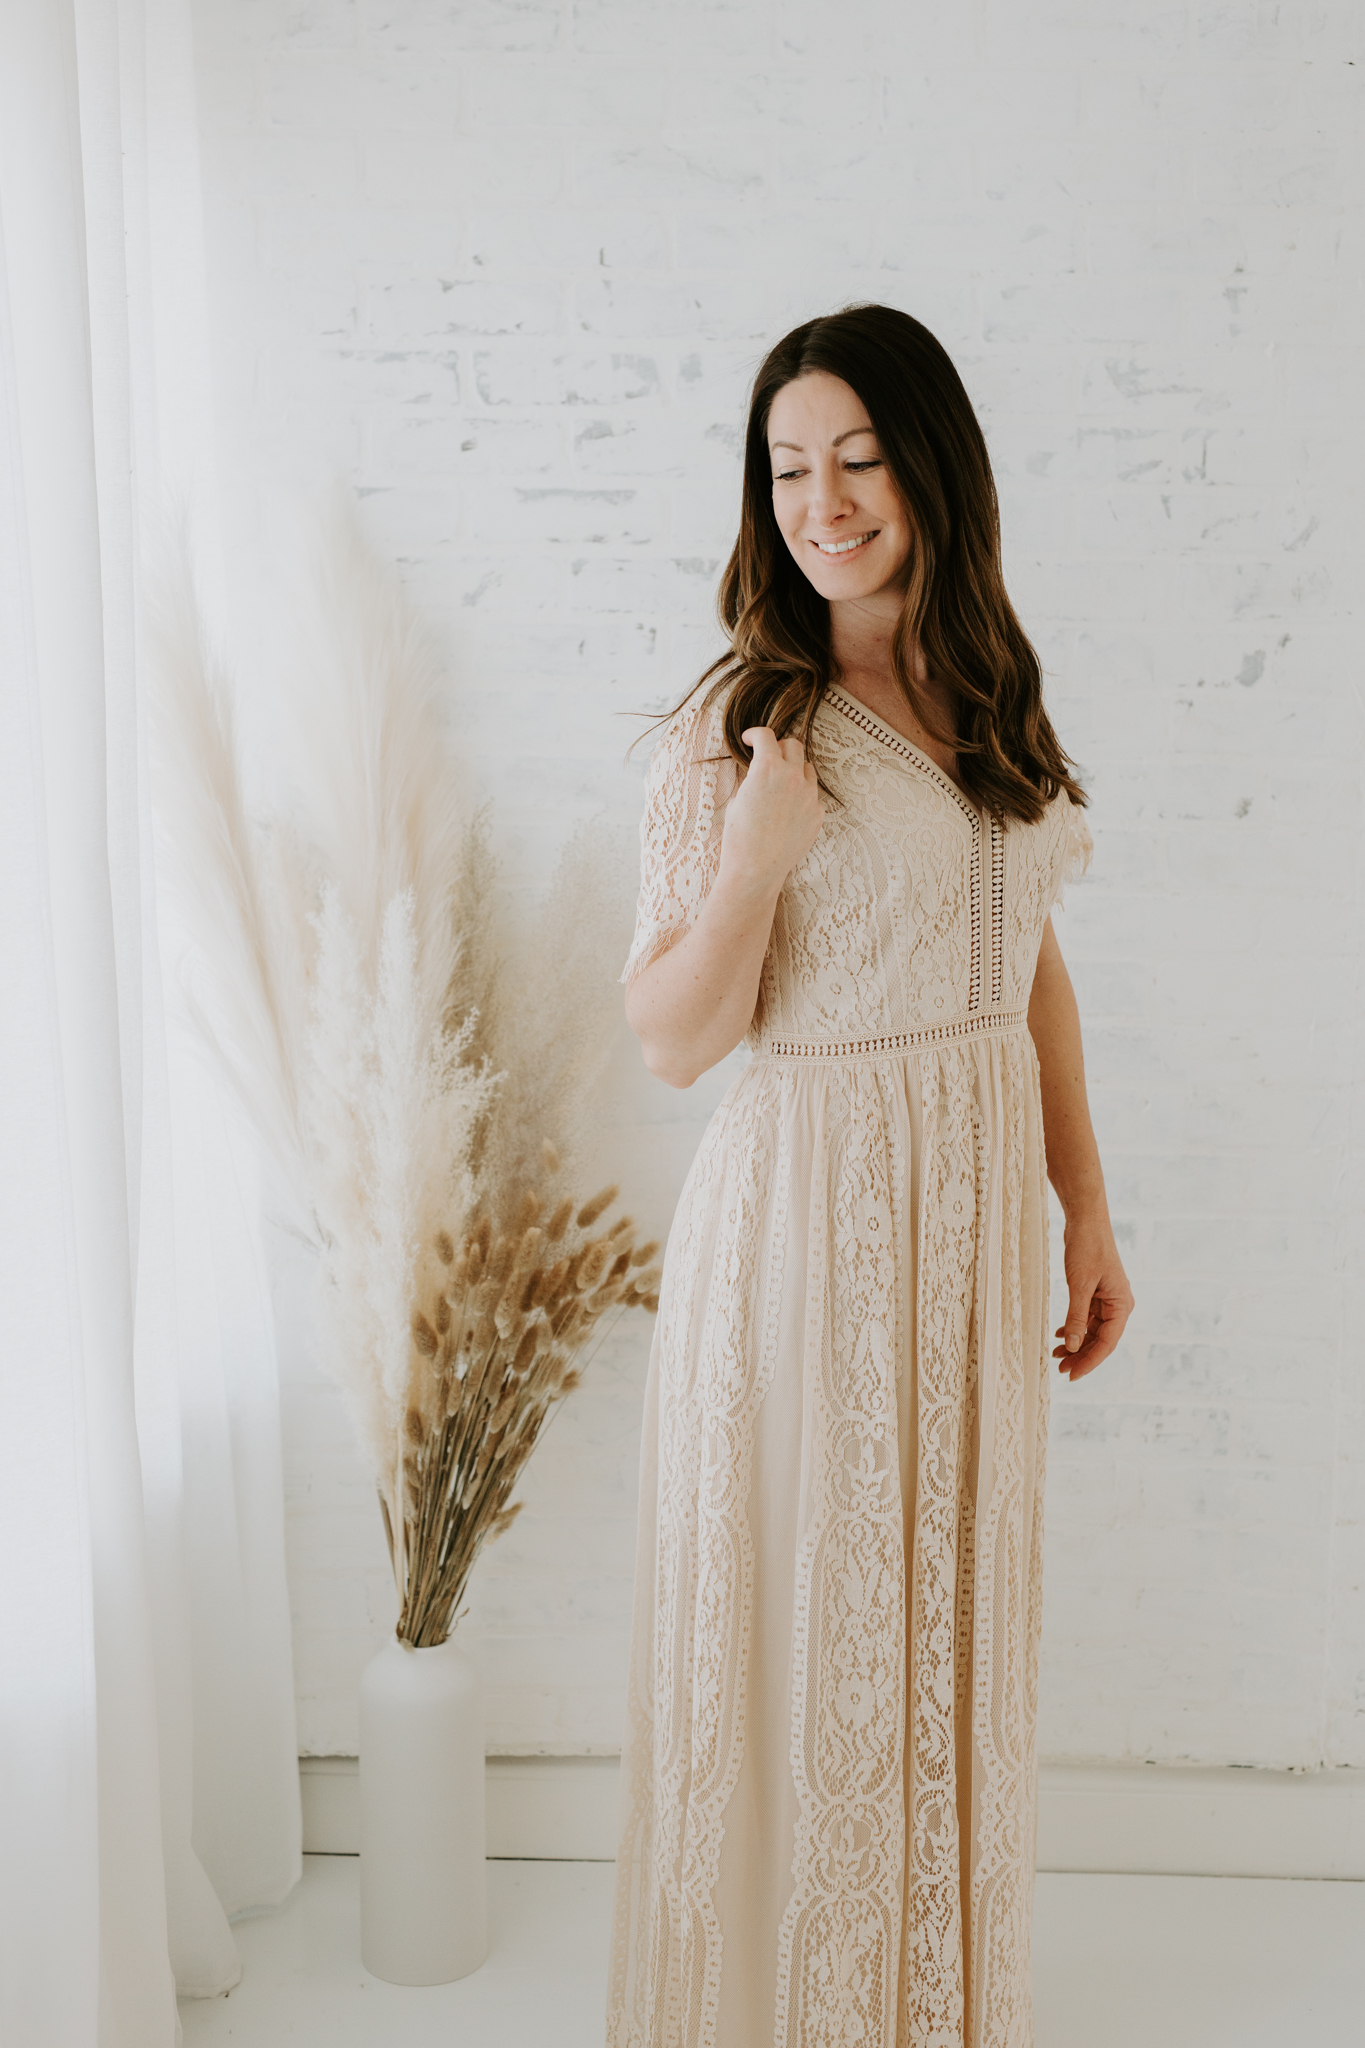 Our client closet dresses | Kelly Adrienne Photography 